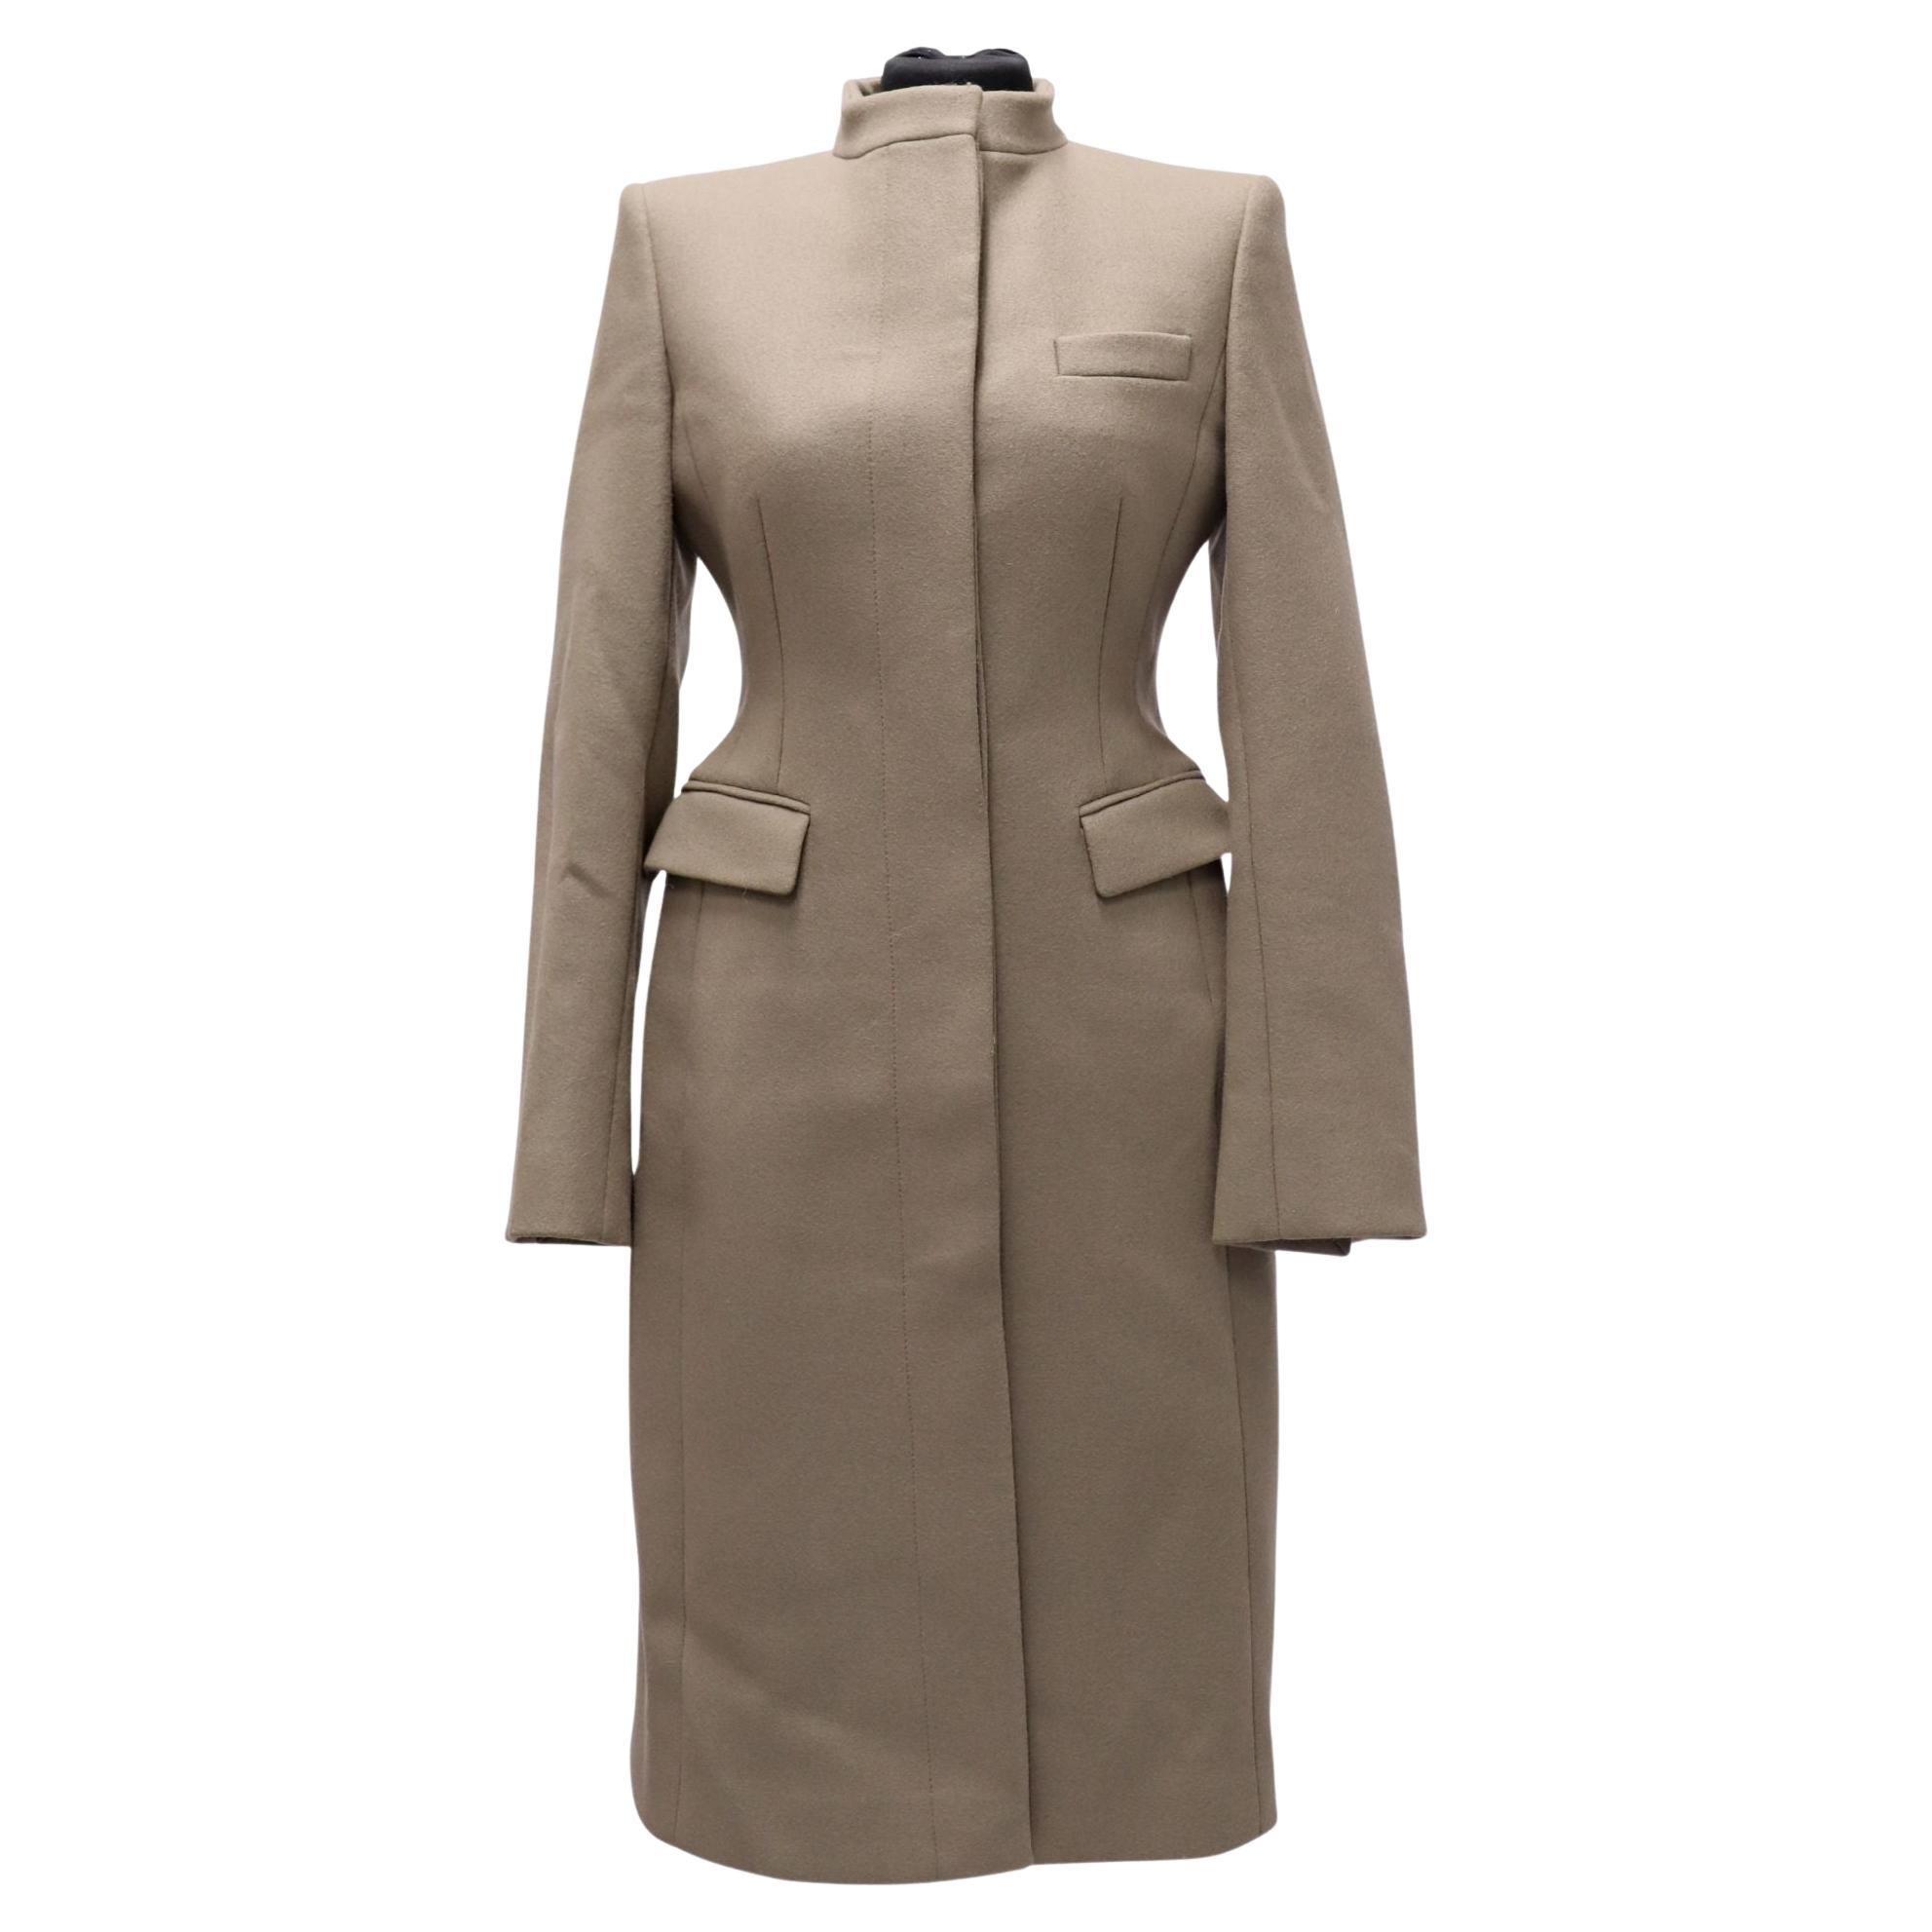 Stella McCartney New With Tags Wool Coat - Size IT 40